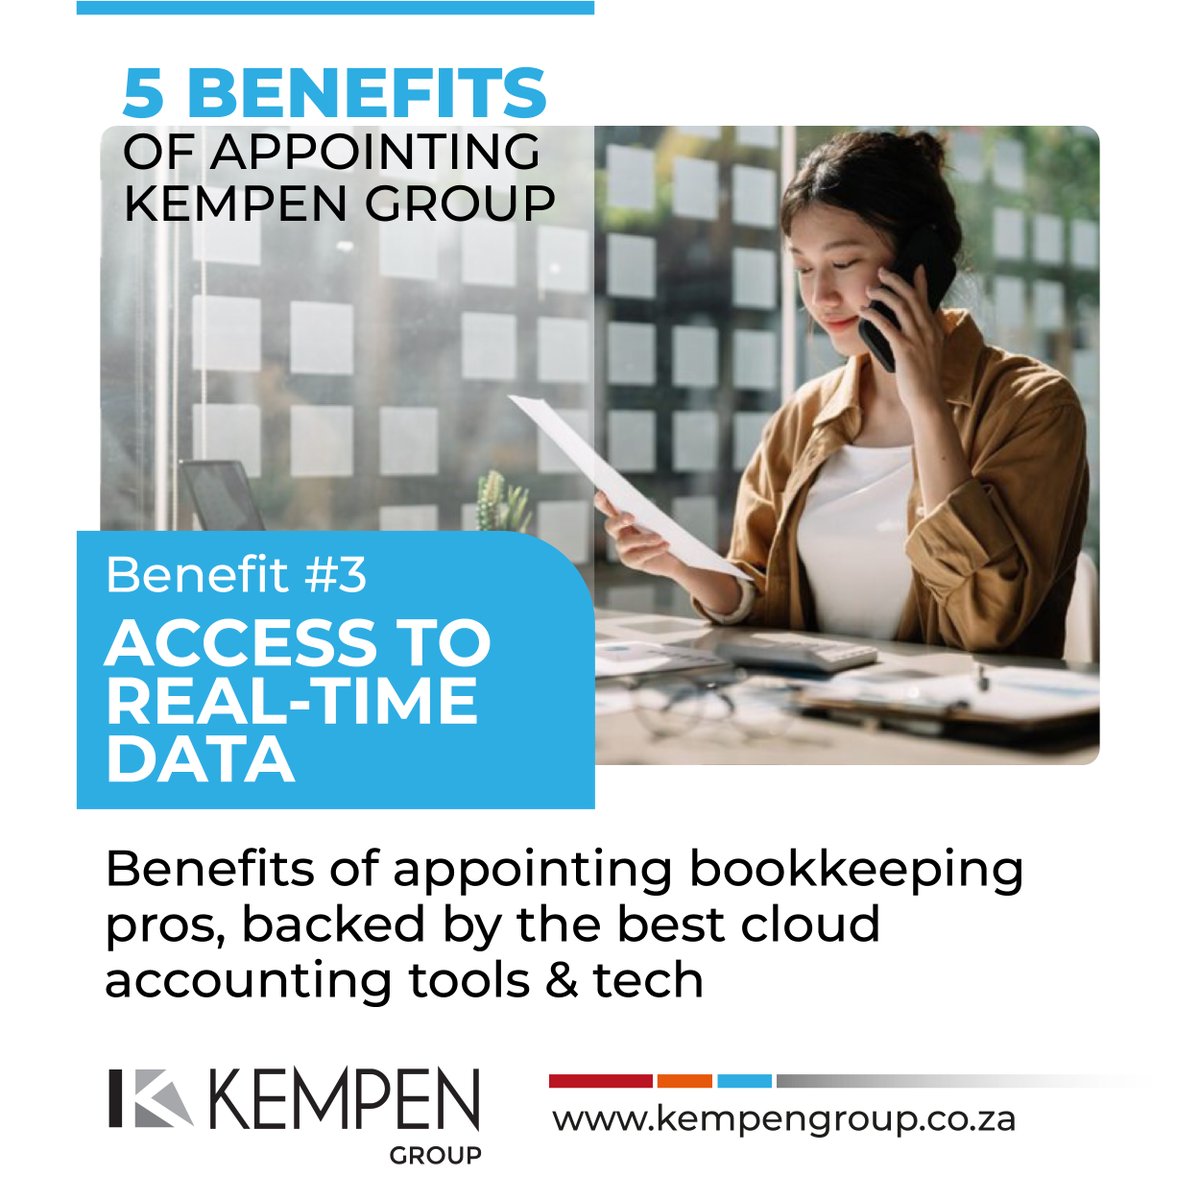 #Cloudbasedaccounting solutions offer instantaneous access to financial information – which is crucial for ongoing informed decision-making in business.

Reach out today.
📱082 940 6700
📧ignus@kempengroup.co.za

#KempenOnline #KempenGroup #Accounting #Xero #Hubdoc #Bookkeeping